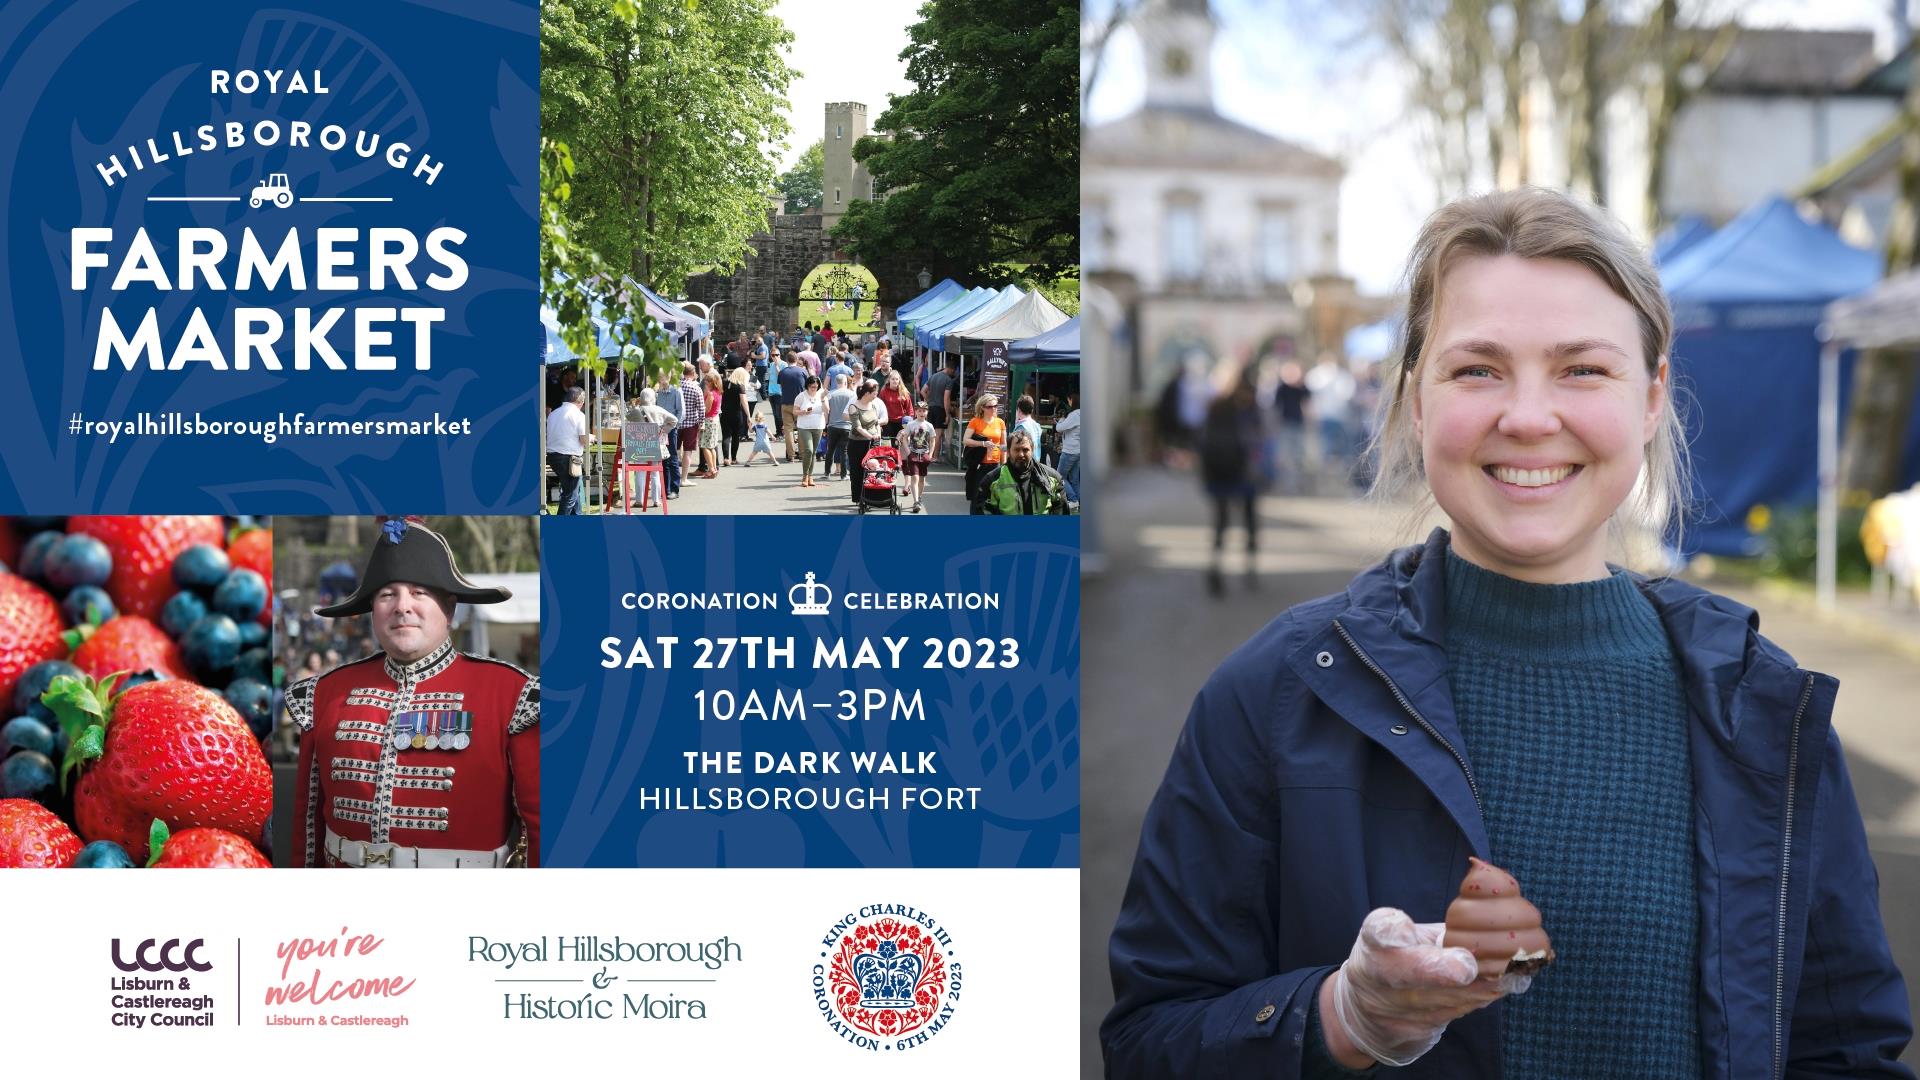 A collage of images to show case the Royal Hillsborough Coronation Celebration Farmers Market on 27th May 23